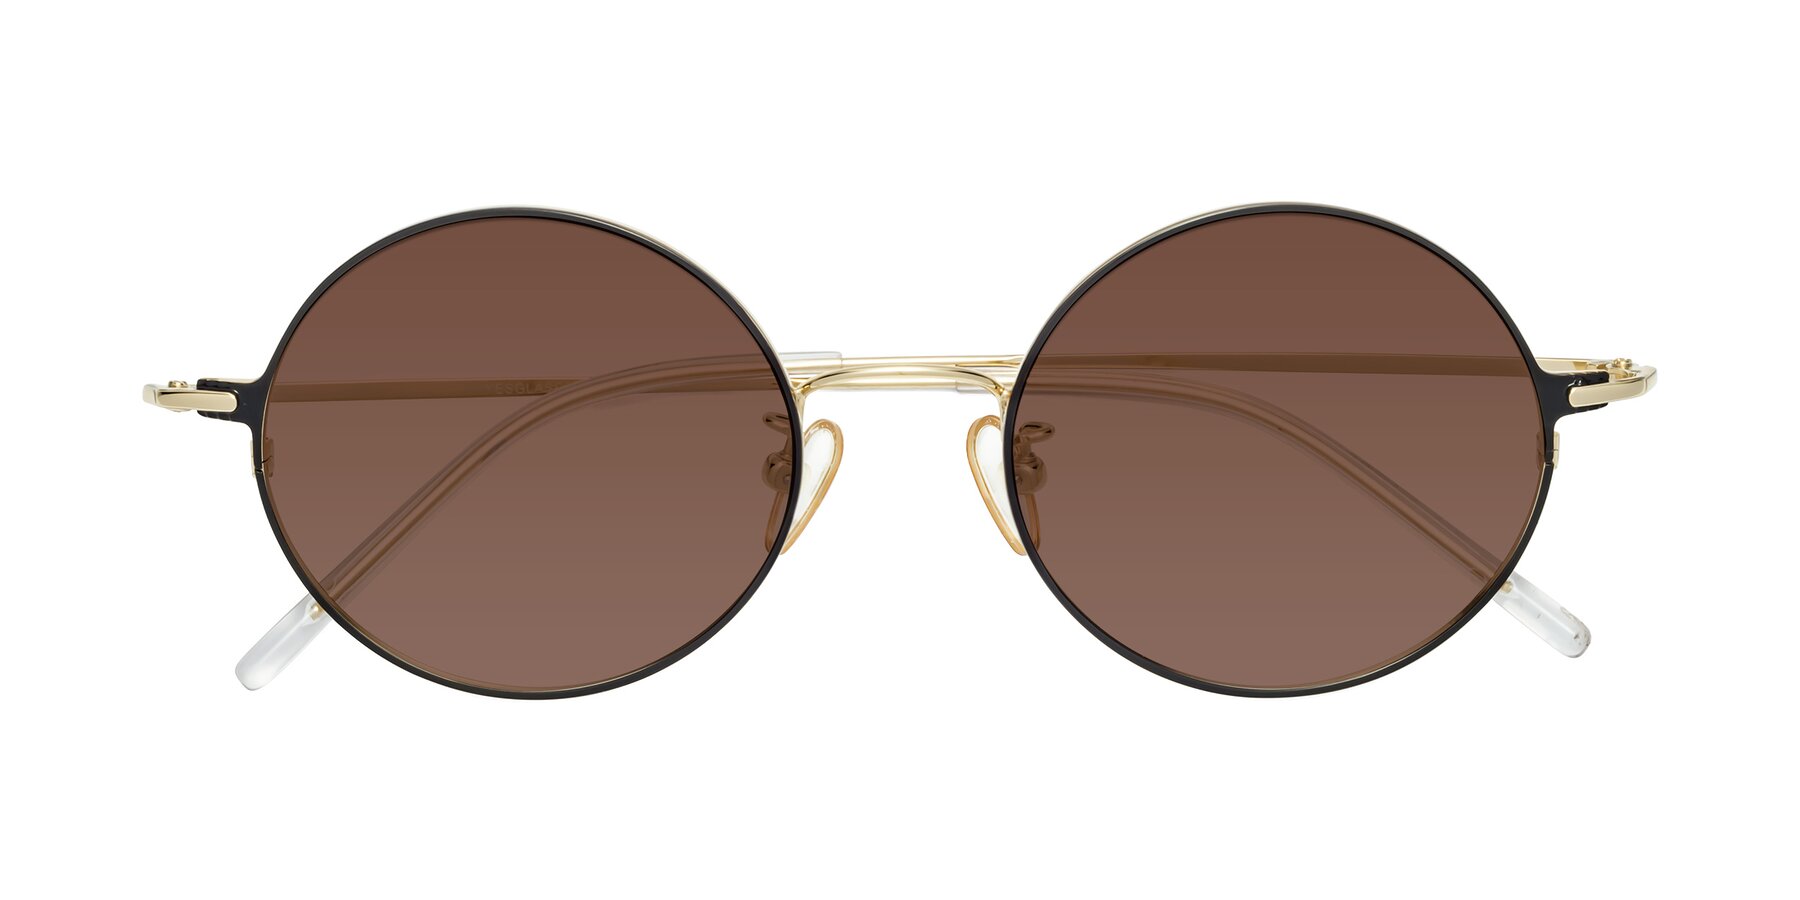 Chanel Round Frame Sunglasses in Brown